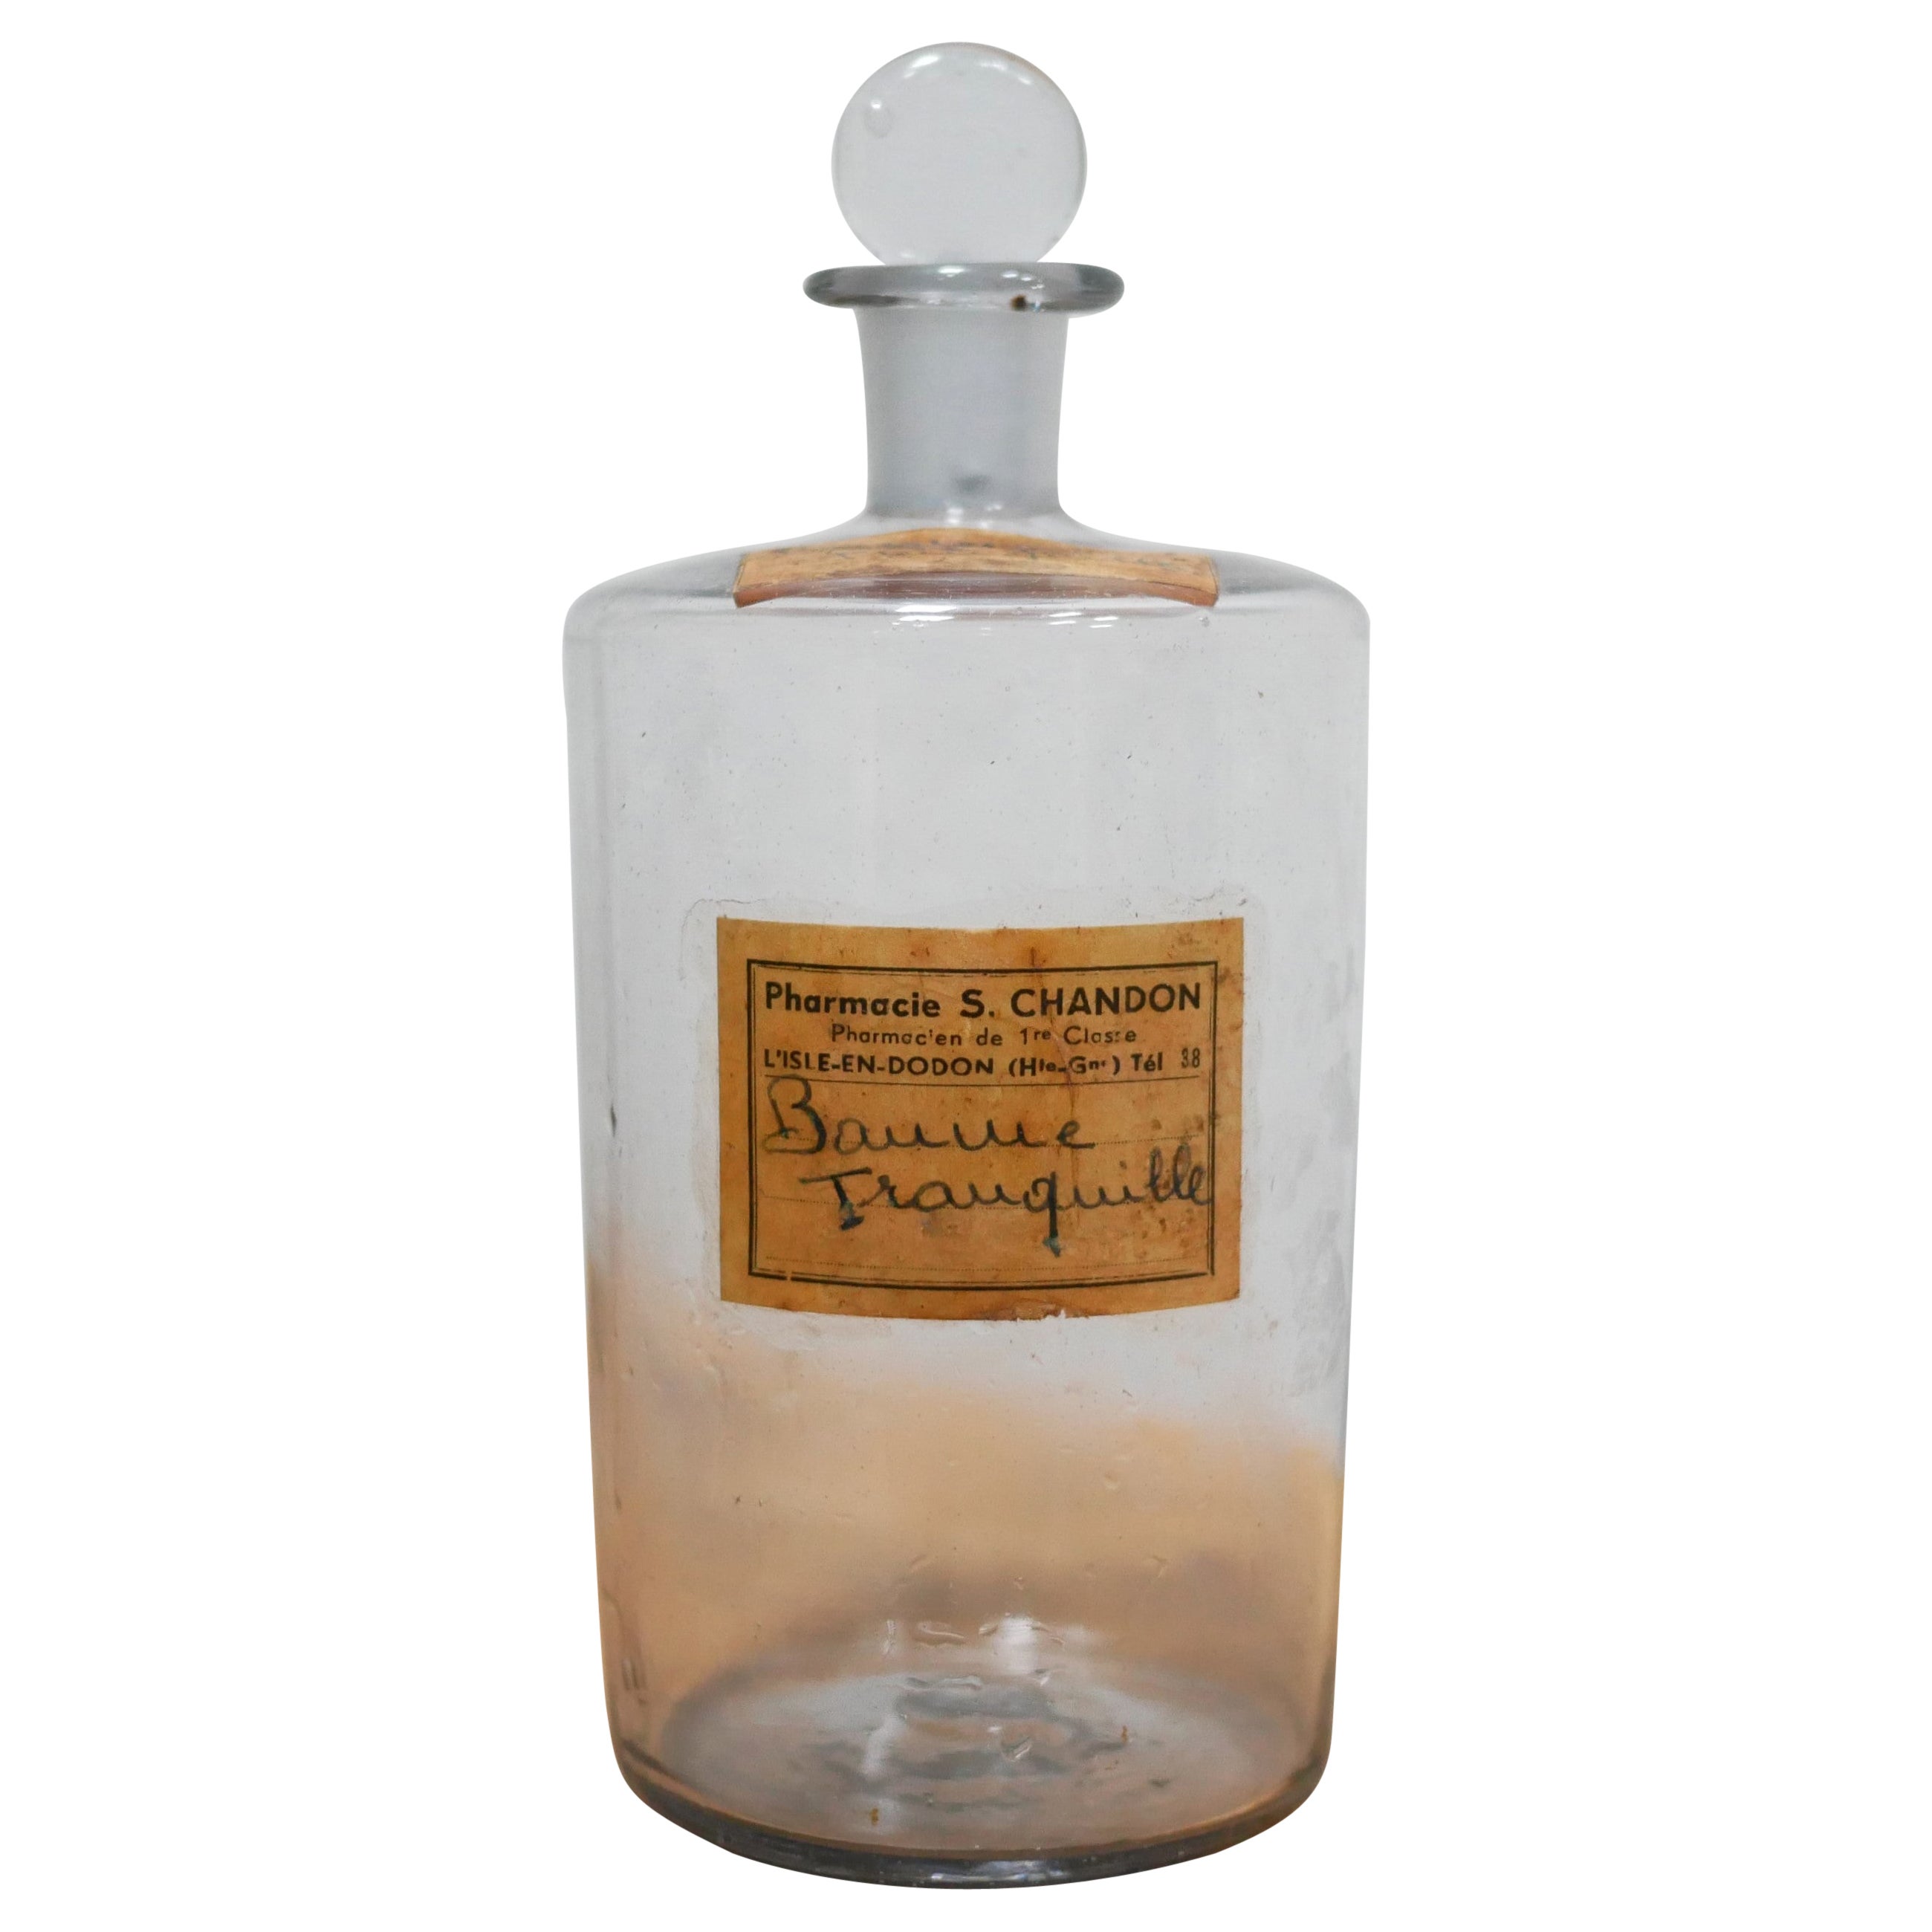 Apothecary Bottles - 67 For Sale on 1stDibs  antique chemist bottles,  vintage pharmacy bottles, apothecary bottles for sale